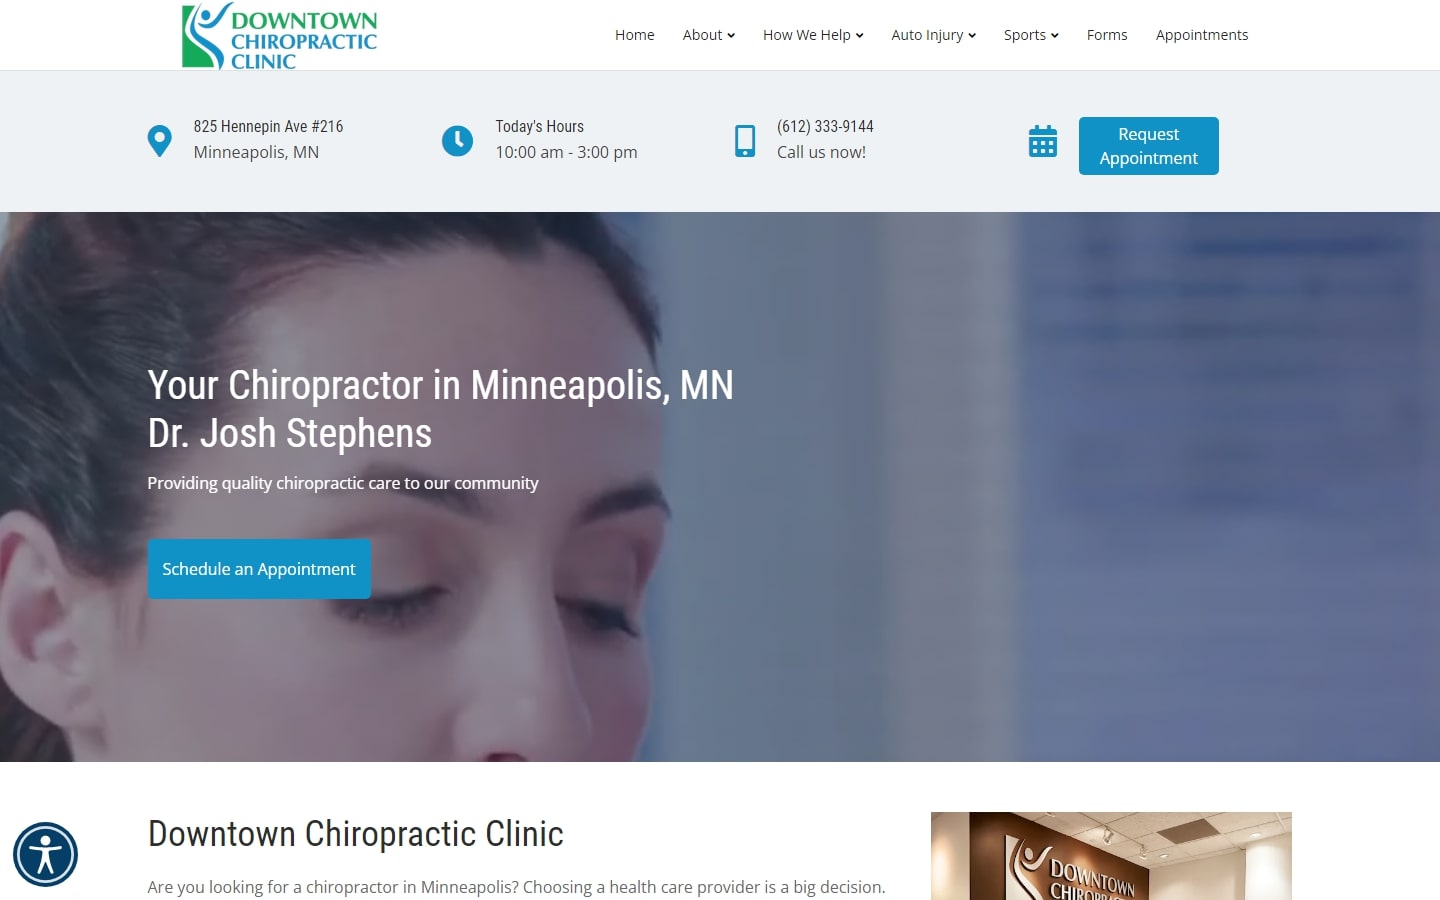 Downtown Chiropractic Clinic